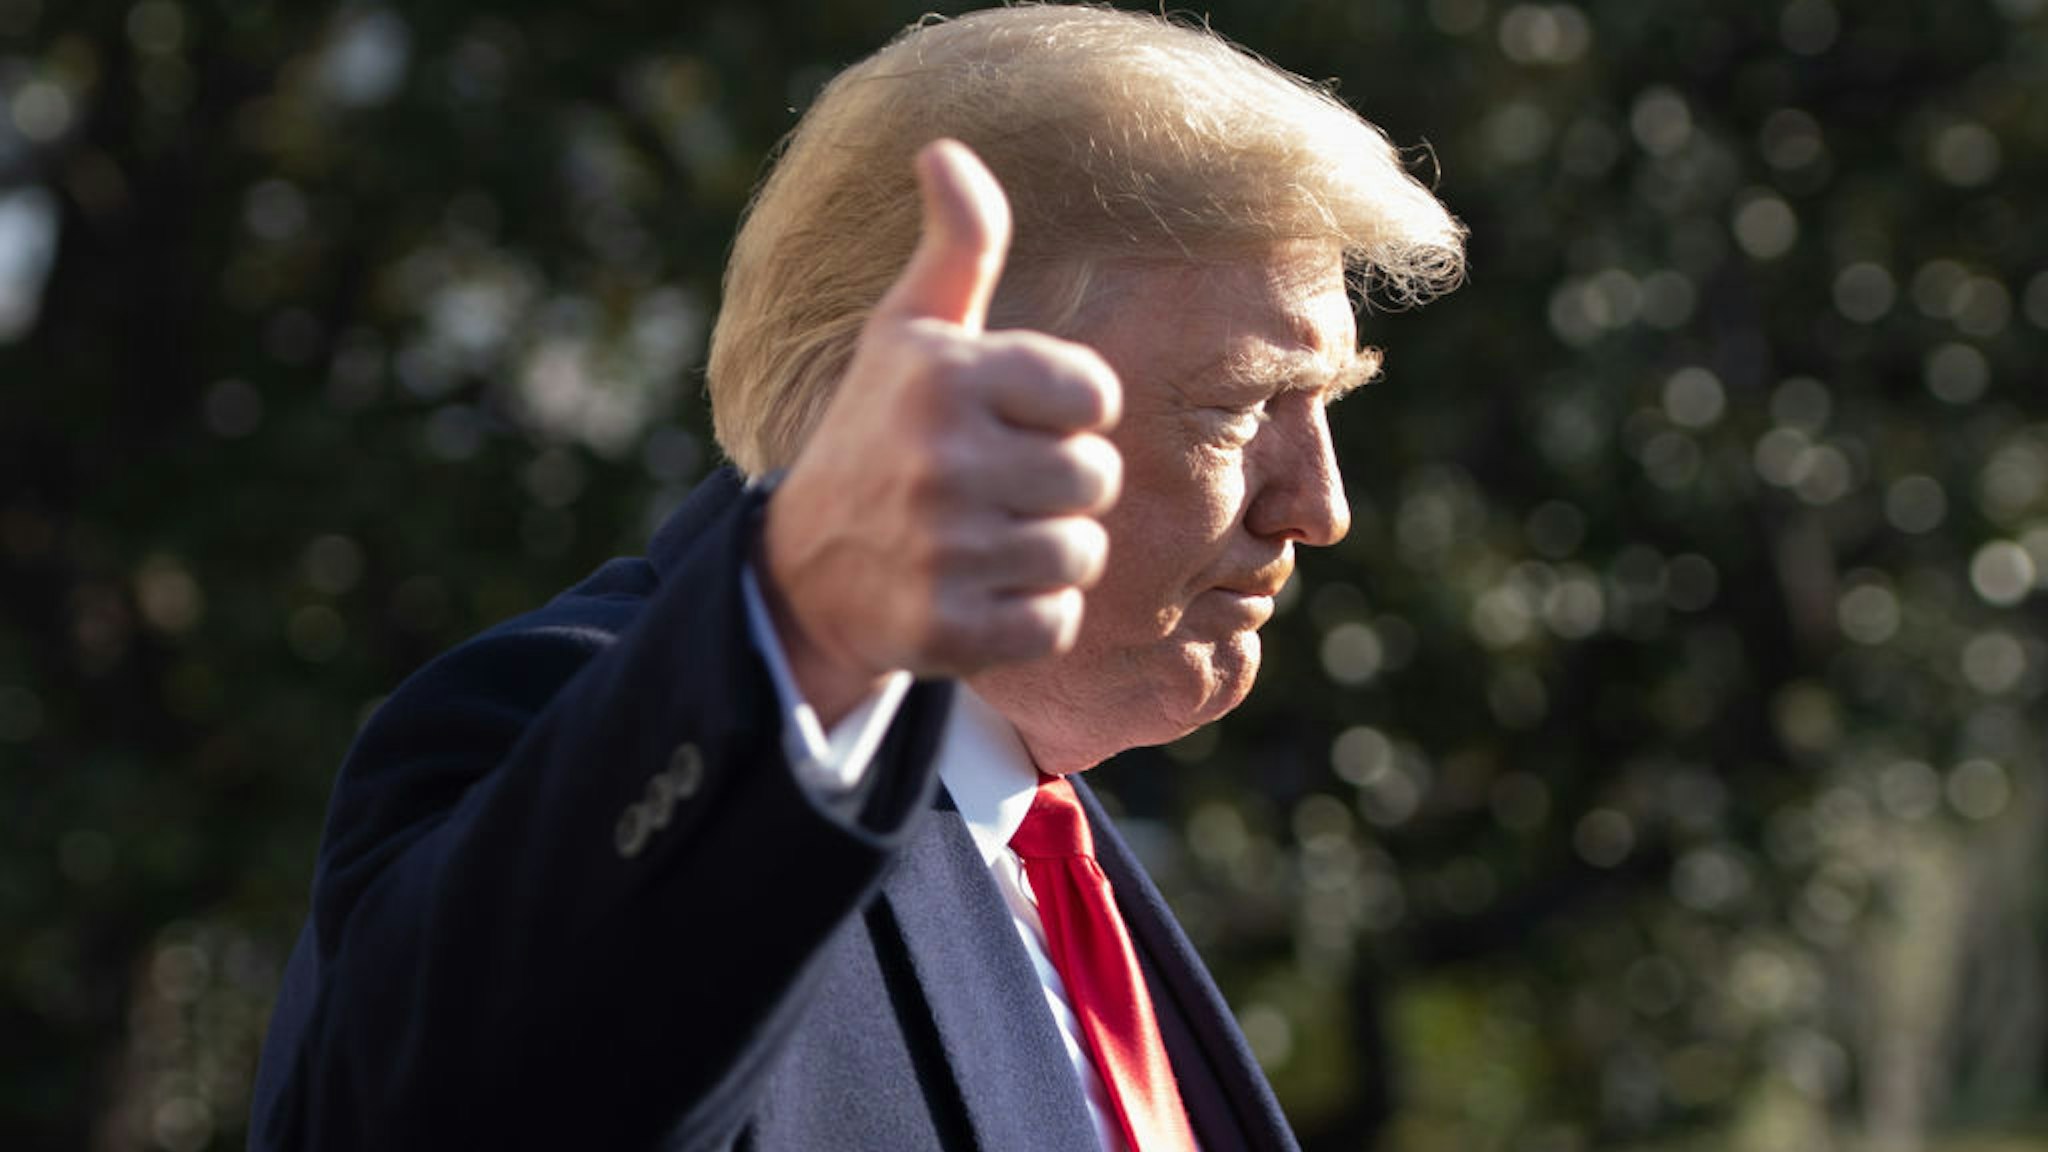 US President Donald Trump gives a thumbs-up as he speaks to the press as he walks to Marine One prior to departing from the South Lawn of the White House in Washington, DC, December 7, 2018. - Trump is traveling to Kansas City, Missouri. (Photo by SAUL LOEB / AFP) (Photo by SAUL LOEB/AFP via Getty Images)